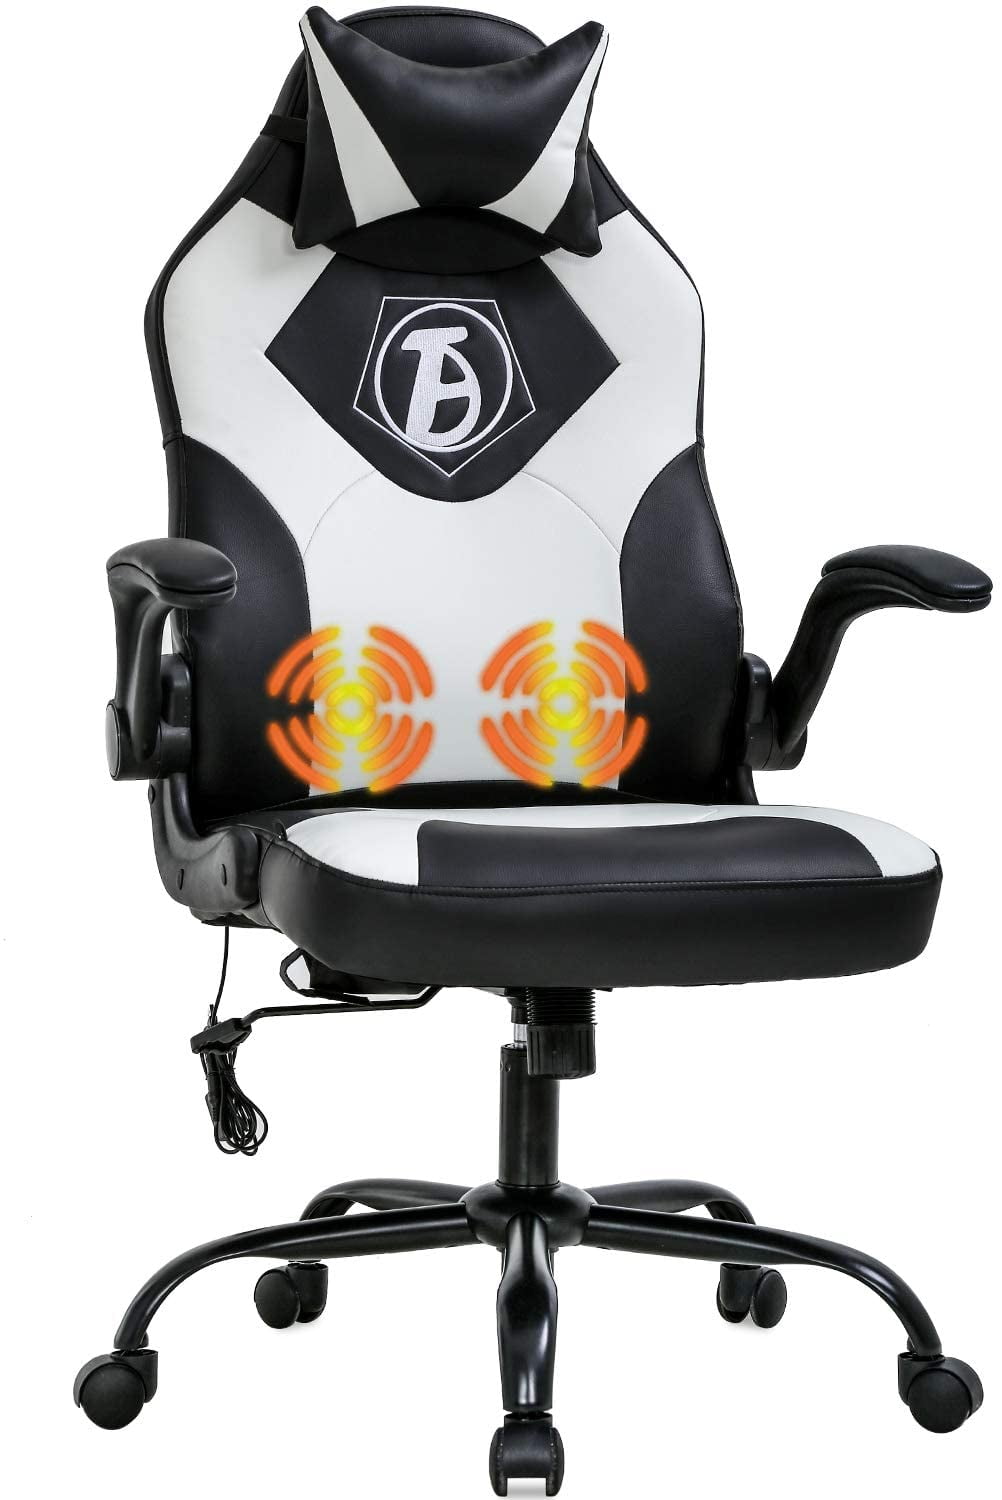 Lumbar and Head Pillow Black and Red Ergonomic Desk Chair Lockable Tilt Function Adjustable Height Armrests INTEY Gaming Chair Swivel Office Chairs 